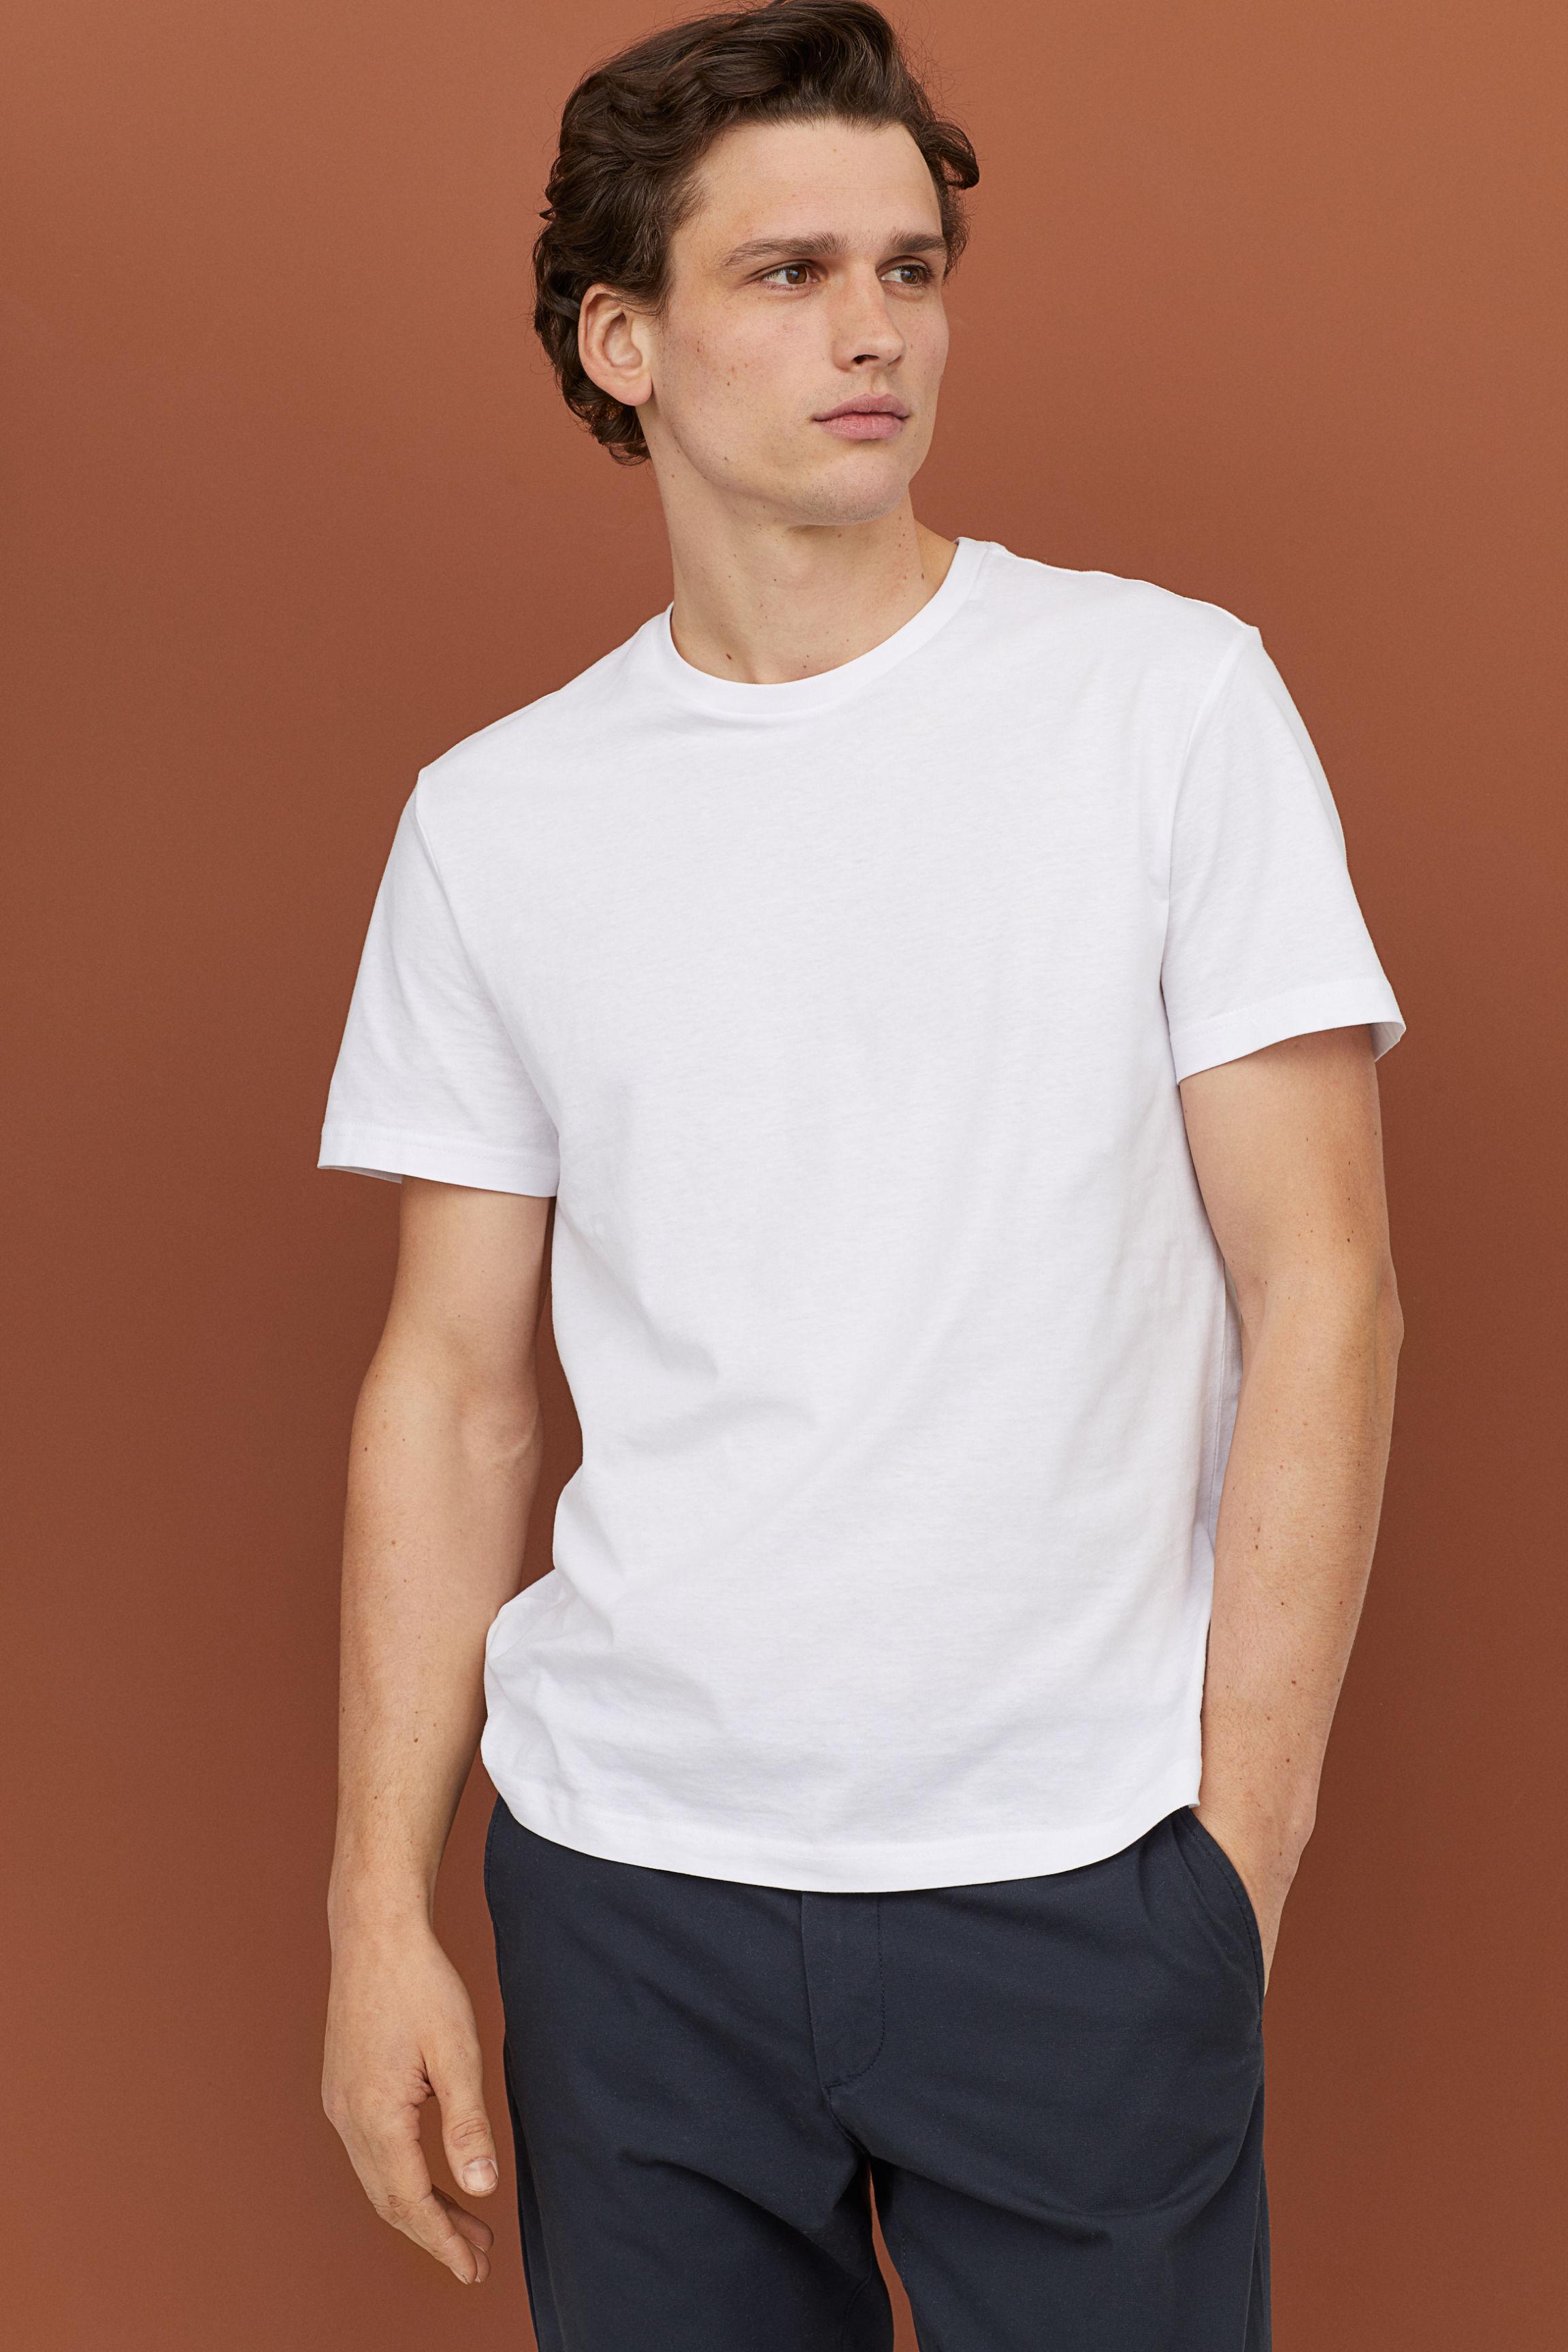 H&M 5-pack T-shirts Regular Fit in White for Men - Lyst